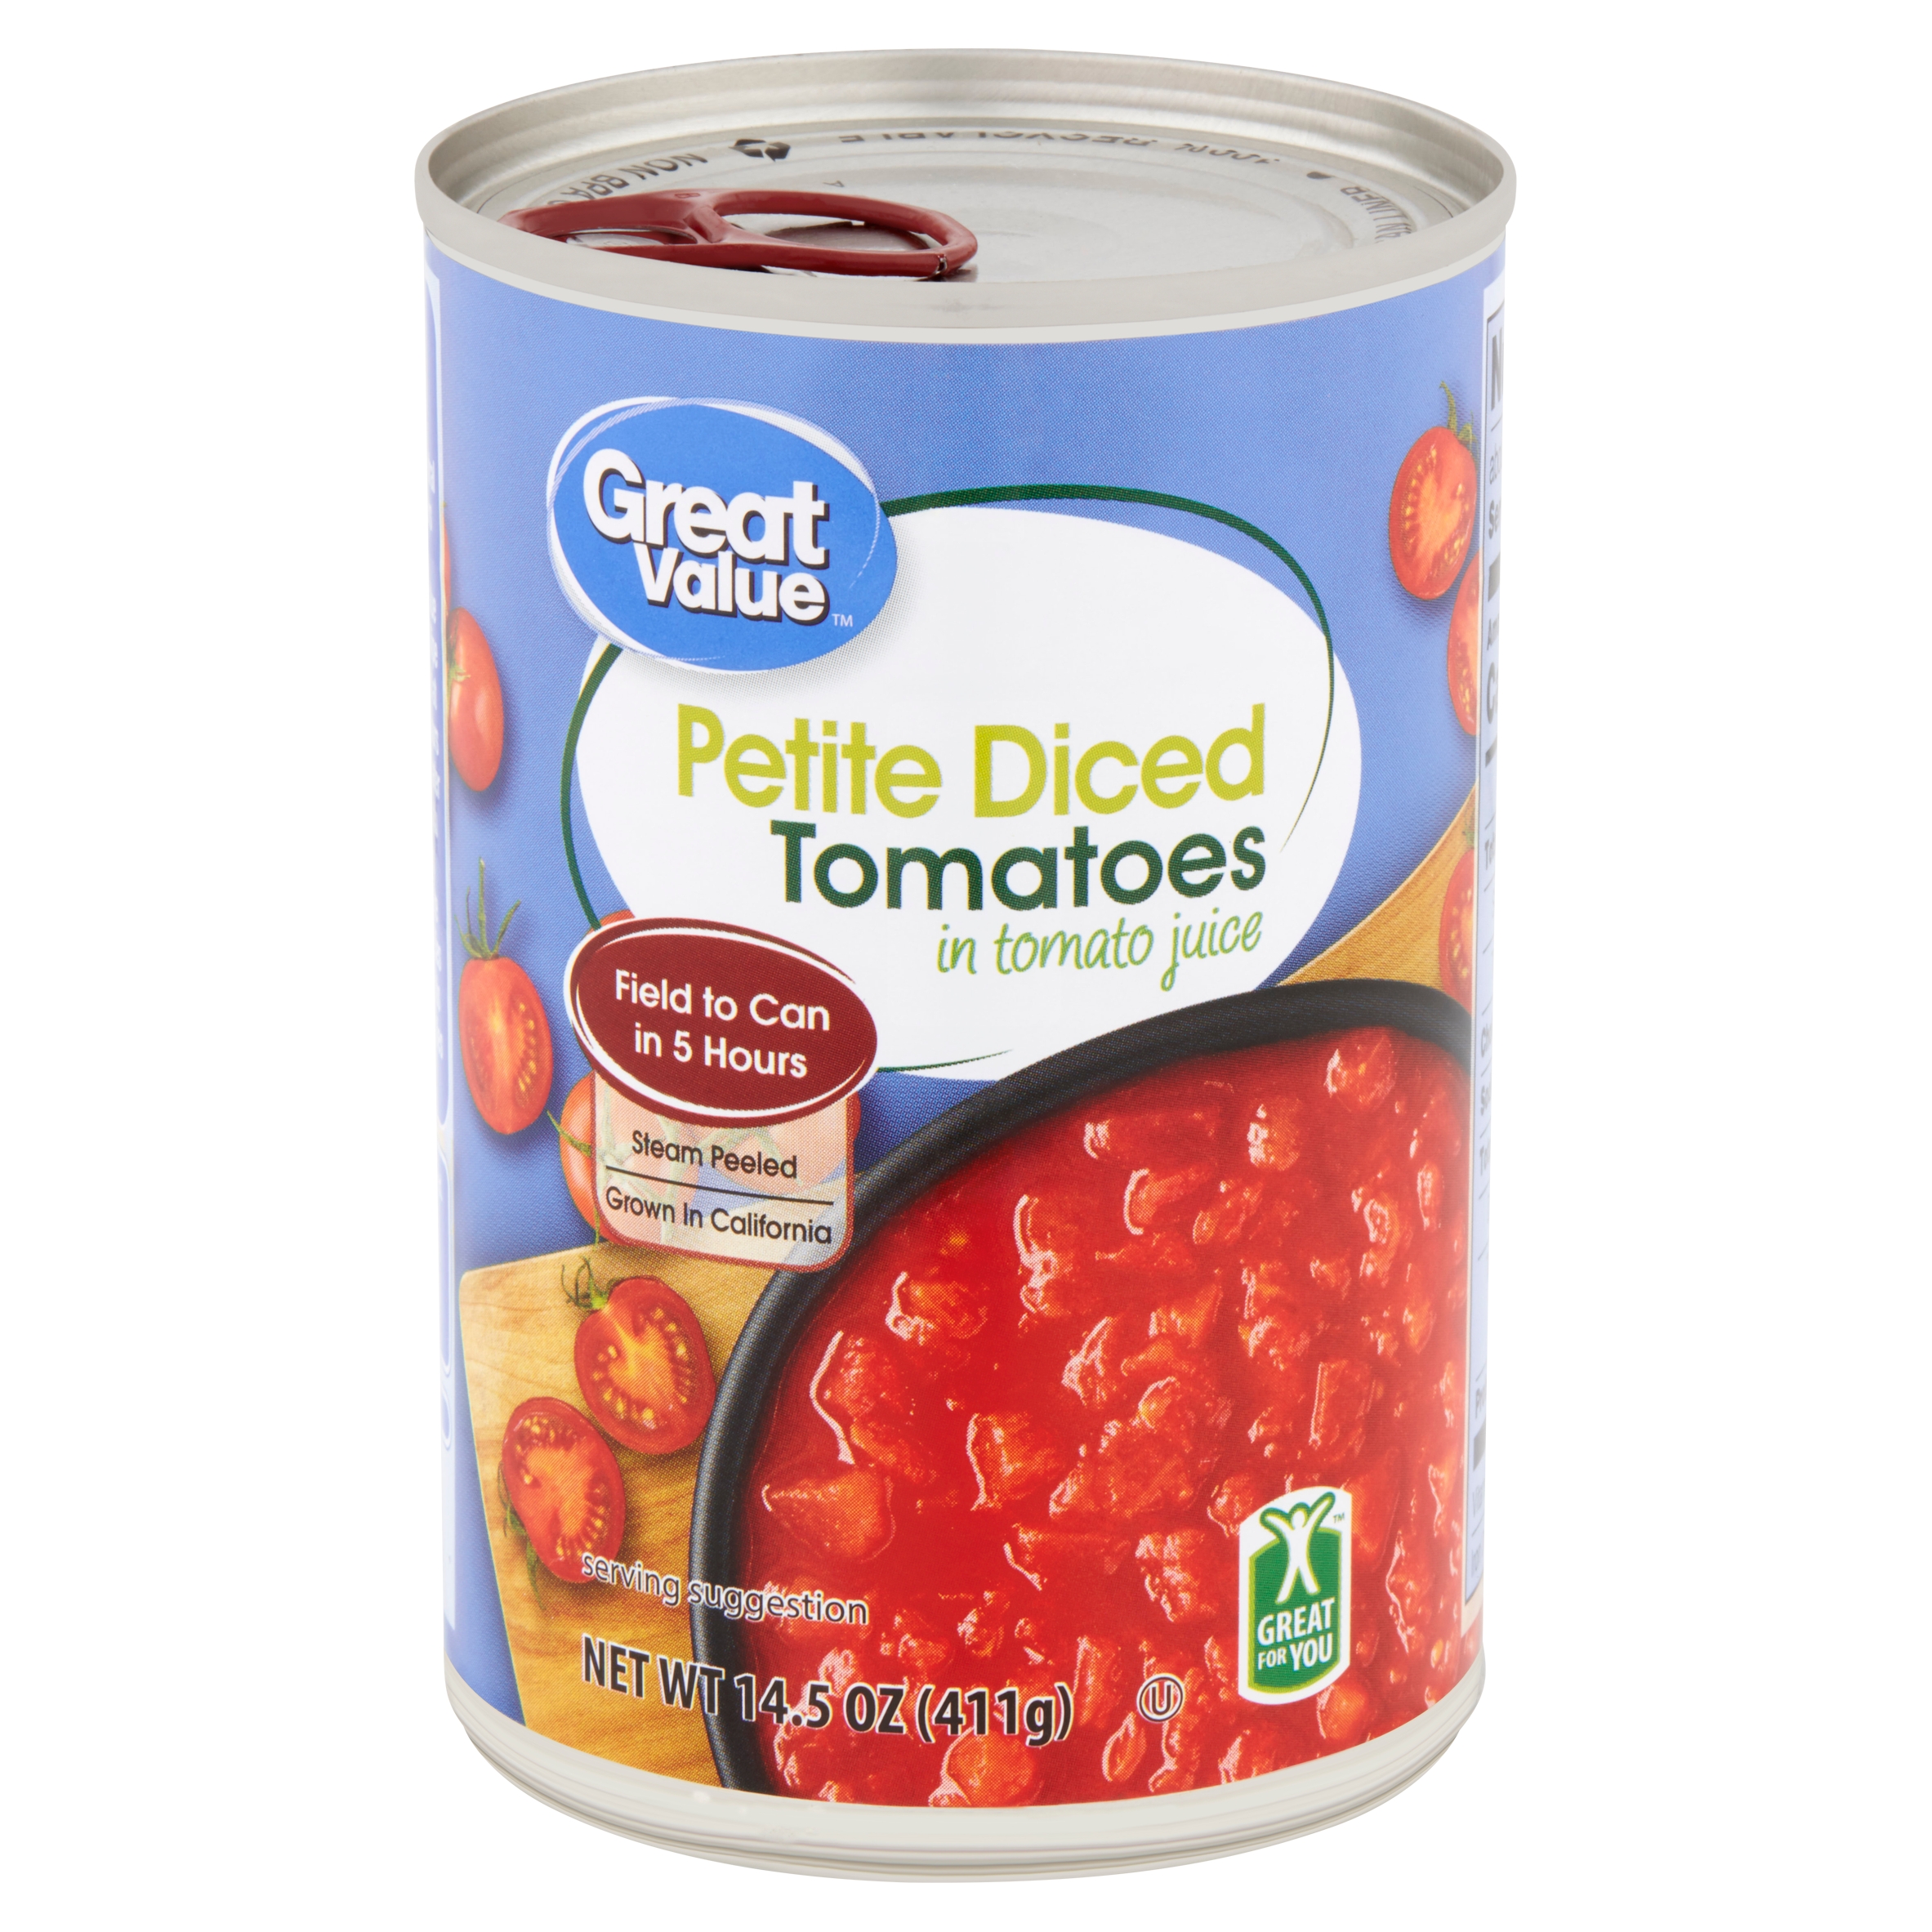 Great Value Petite Diced Tomatoes in Tomato Juice, 14.5 Oz Image